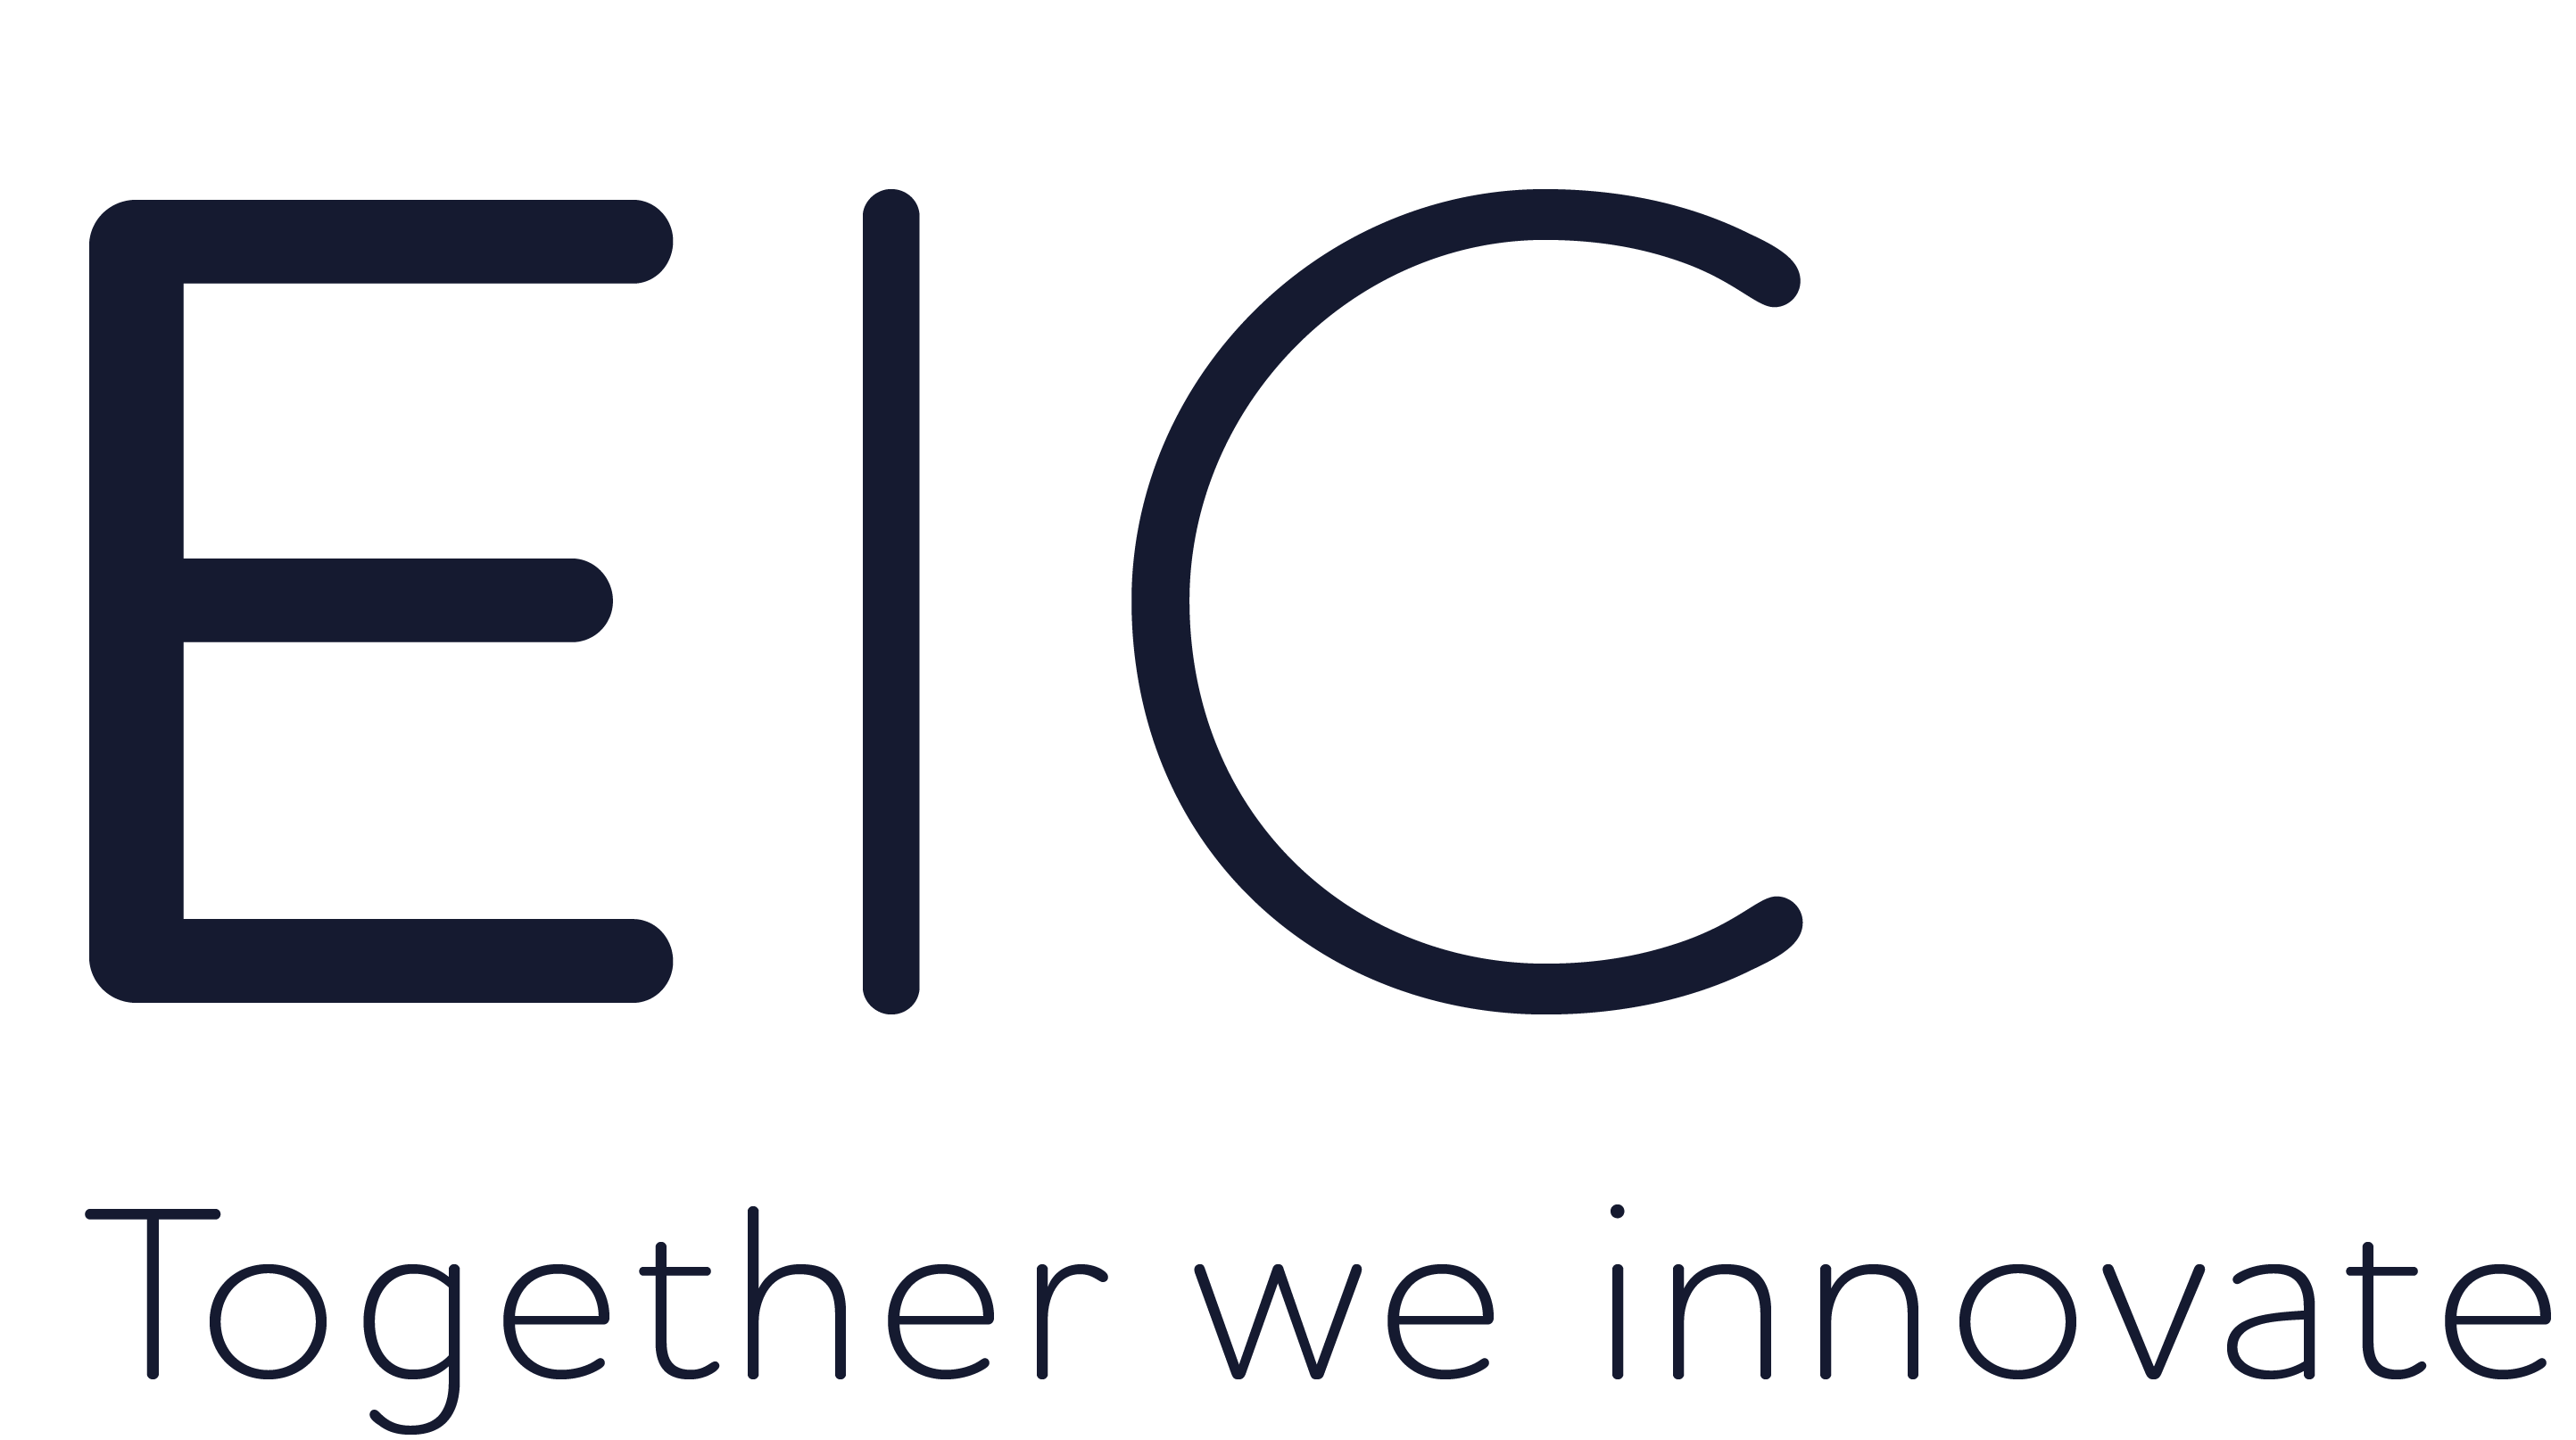 EIC - Together we innovate